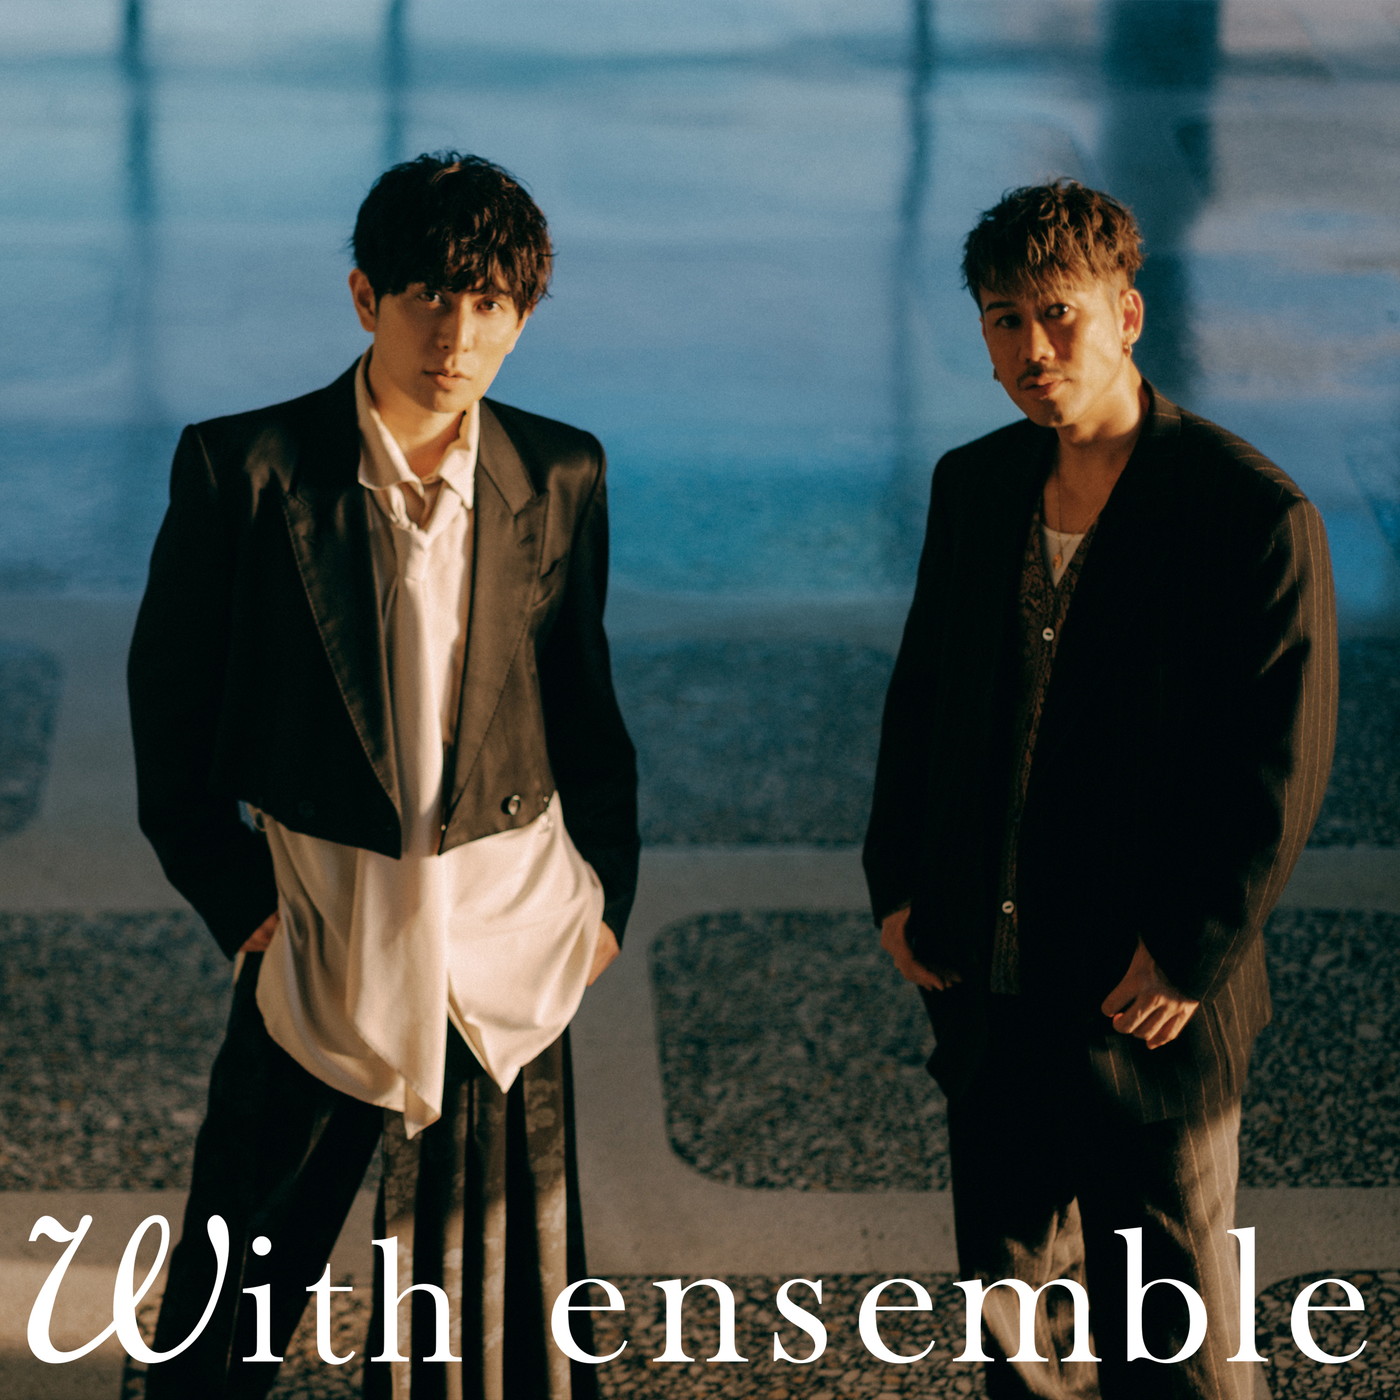 YouTubeチャンネル『With ensemble』より、CHEMISTRY、坂口有望のパフォーマンス音源配信決定 - 画像一覧（4/5）